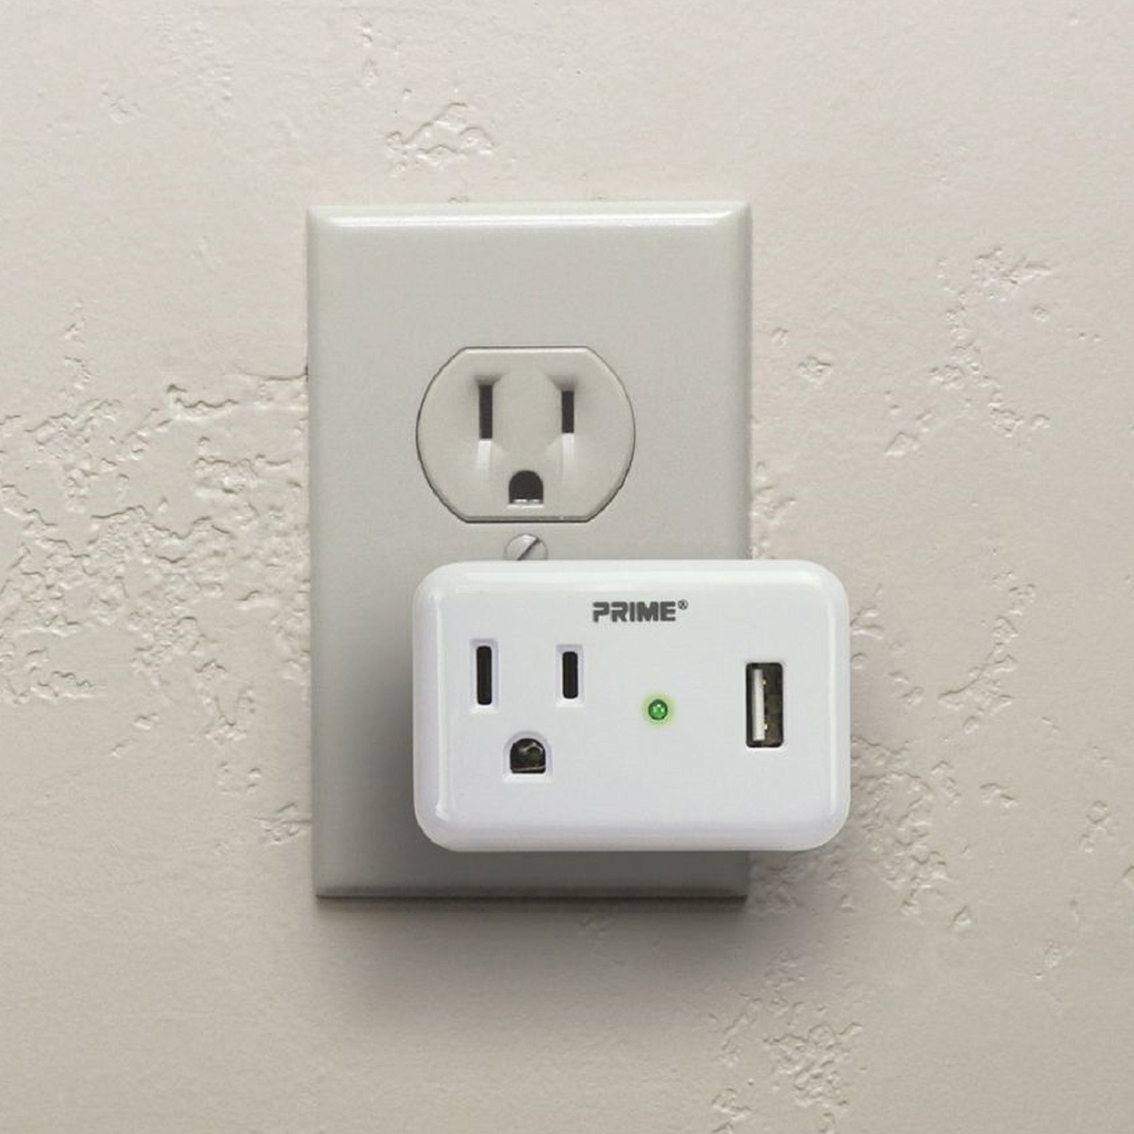 Prime Wire & Cable 1 Outlet 150 Joule Surge Tap with 1 Port 2.4A USB Charger - Image 2 of 2